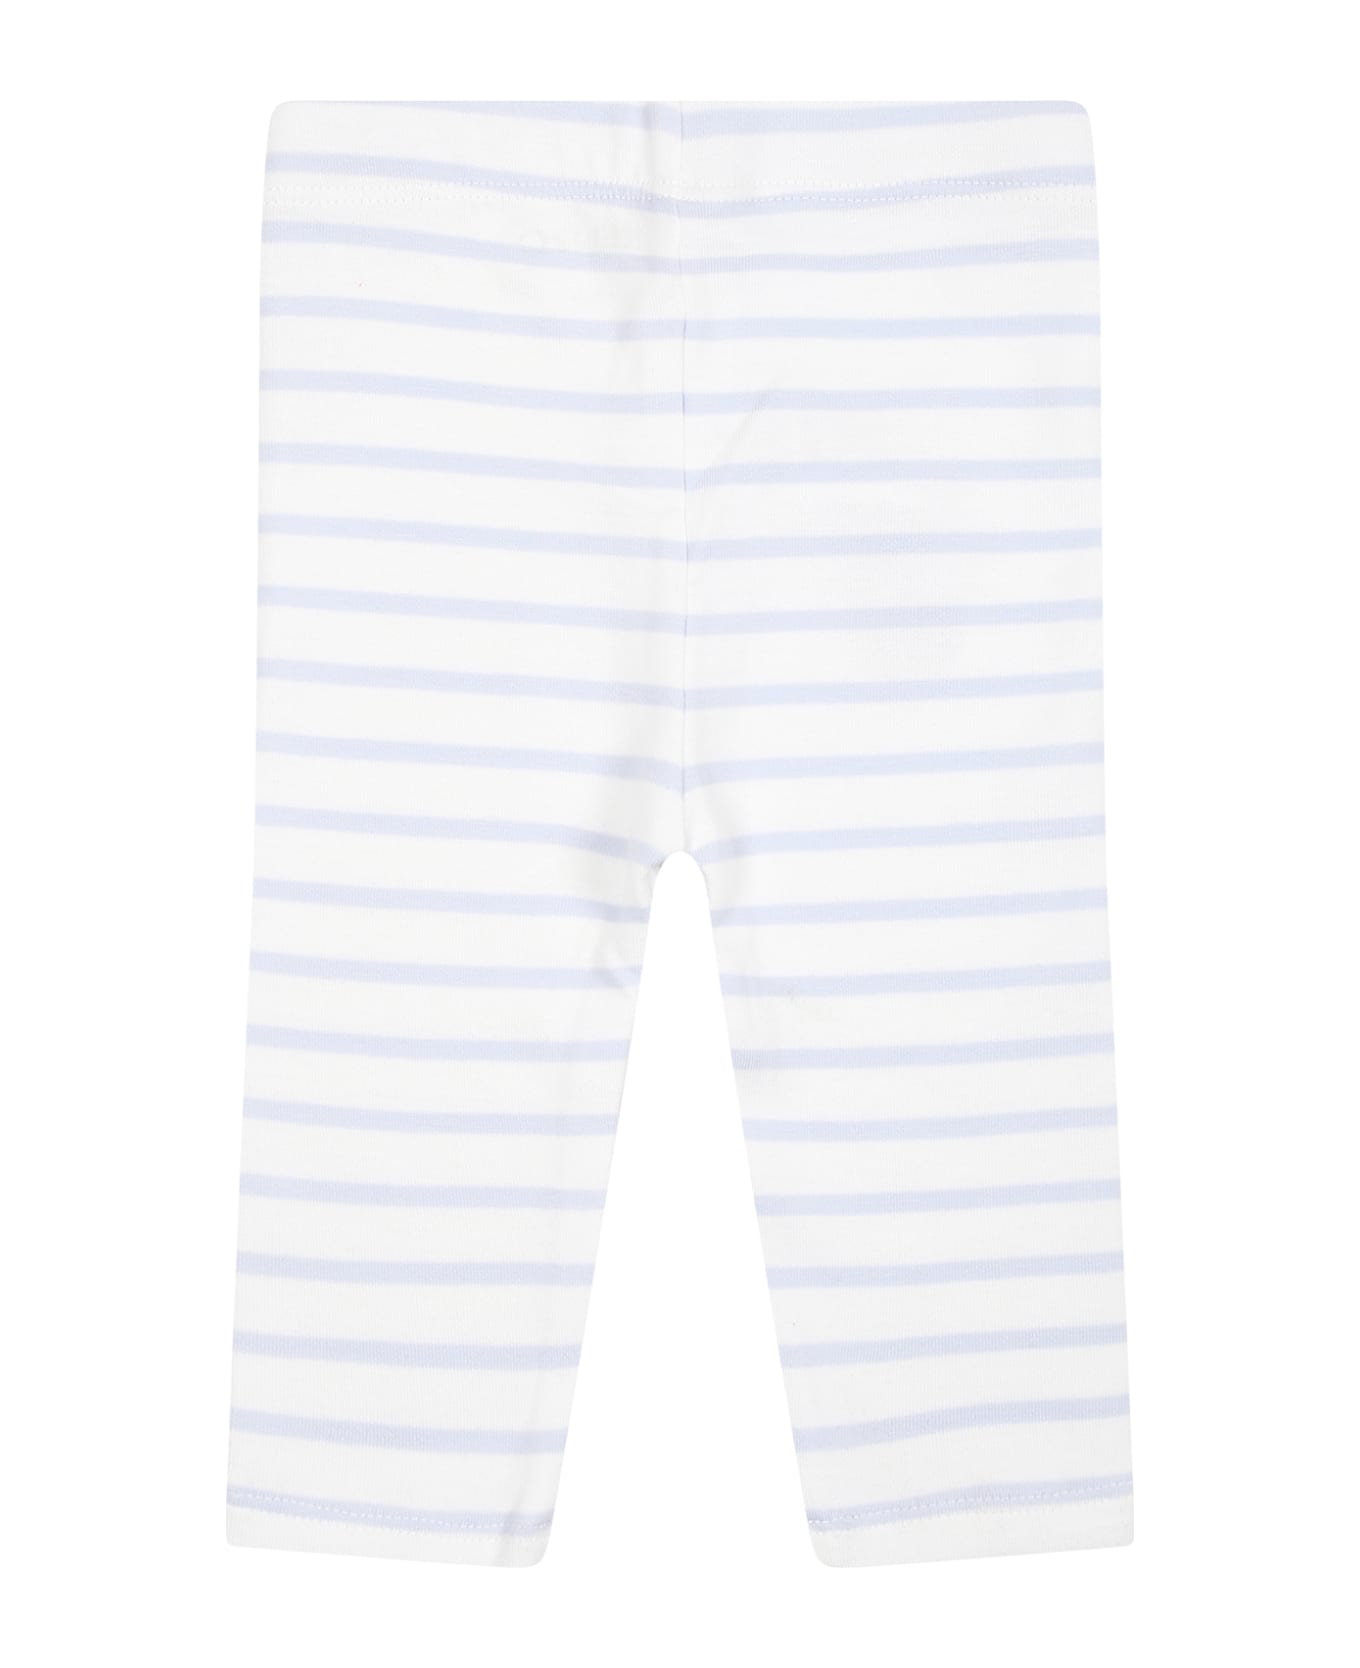 Kenzo Kids White Sports Suit For Baby Girl With Marine Animals - White ボトムス